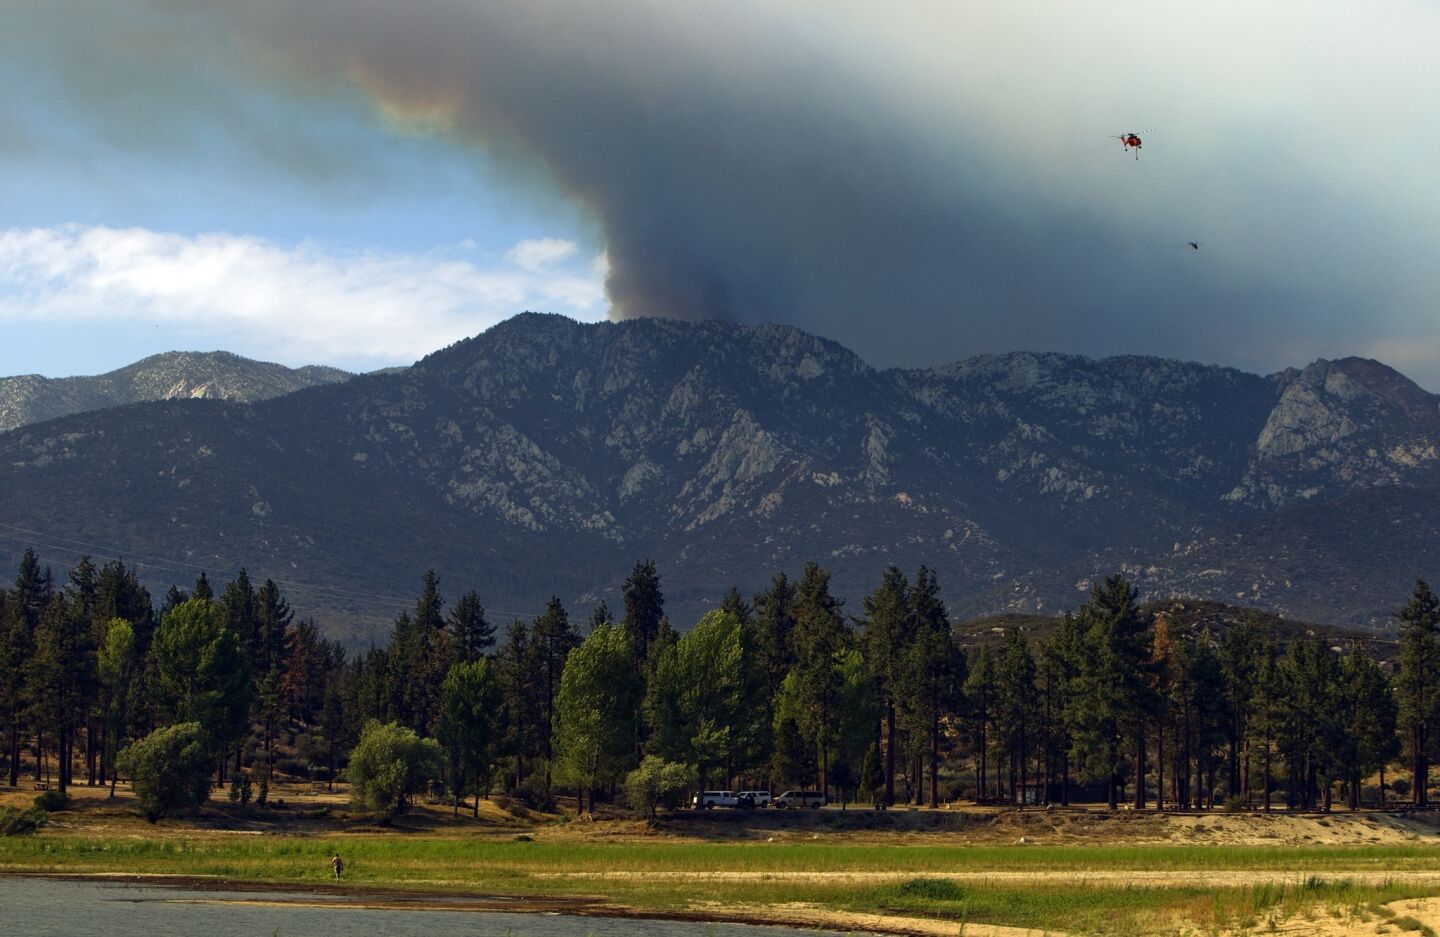 A plume of smoke looms over Lake Hemet as a water-dropping helicopter heads to the lake to refill.